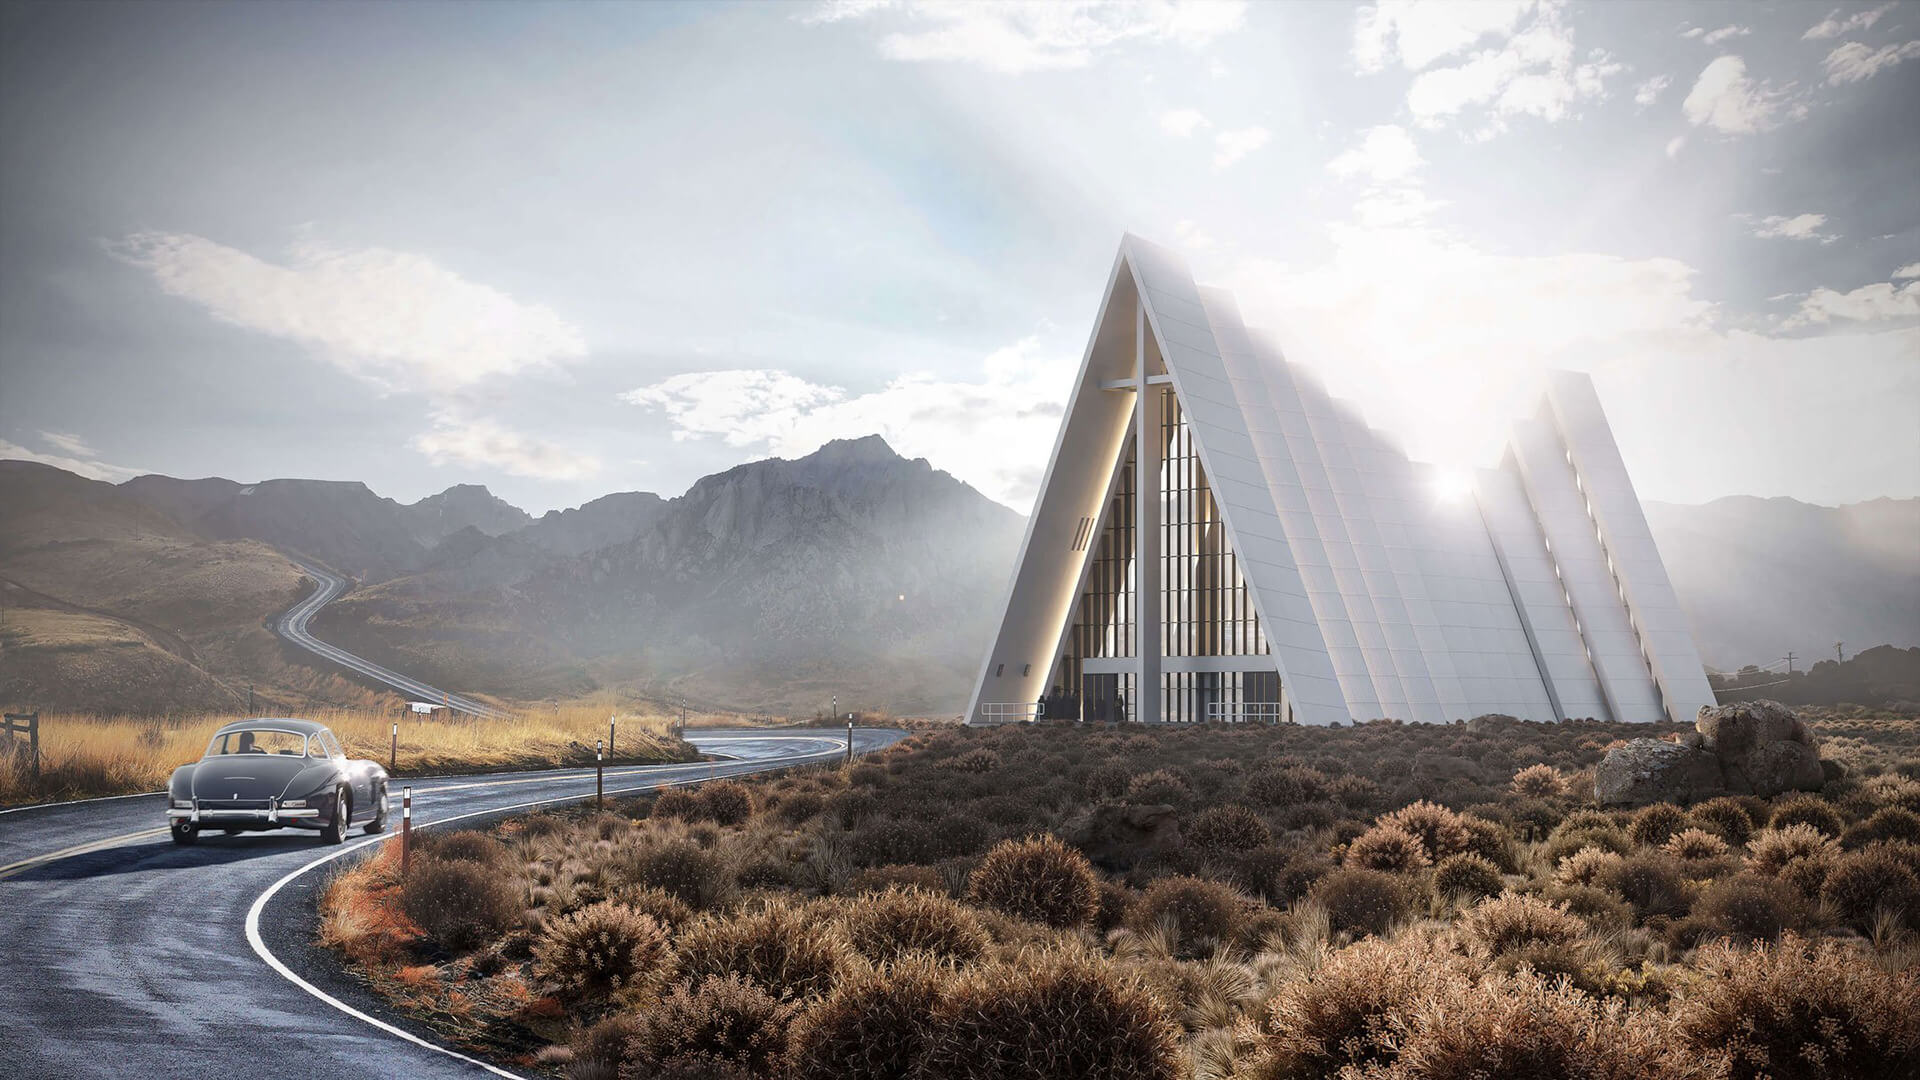 3D Visualization of a Magnificent Church in Norway